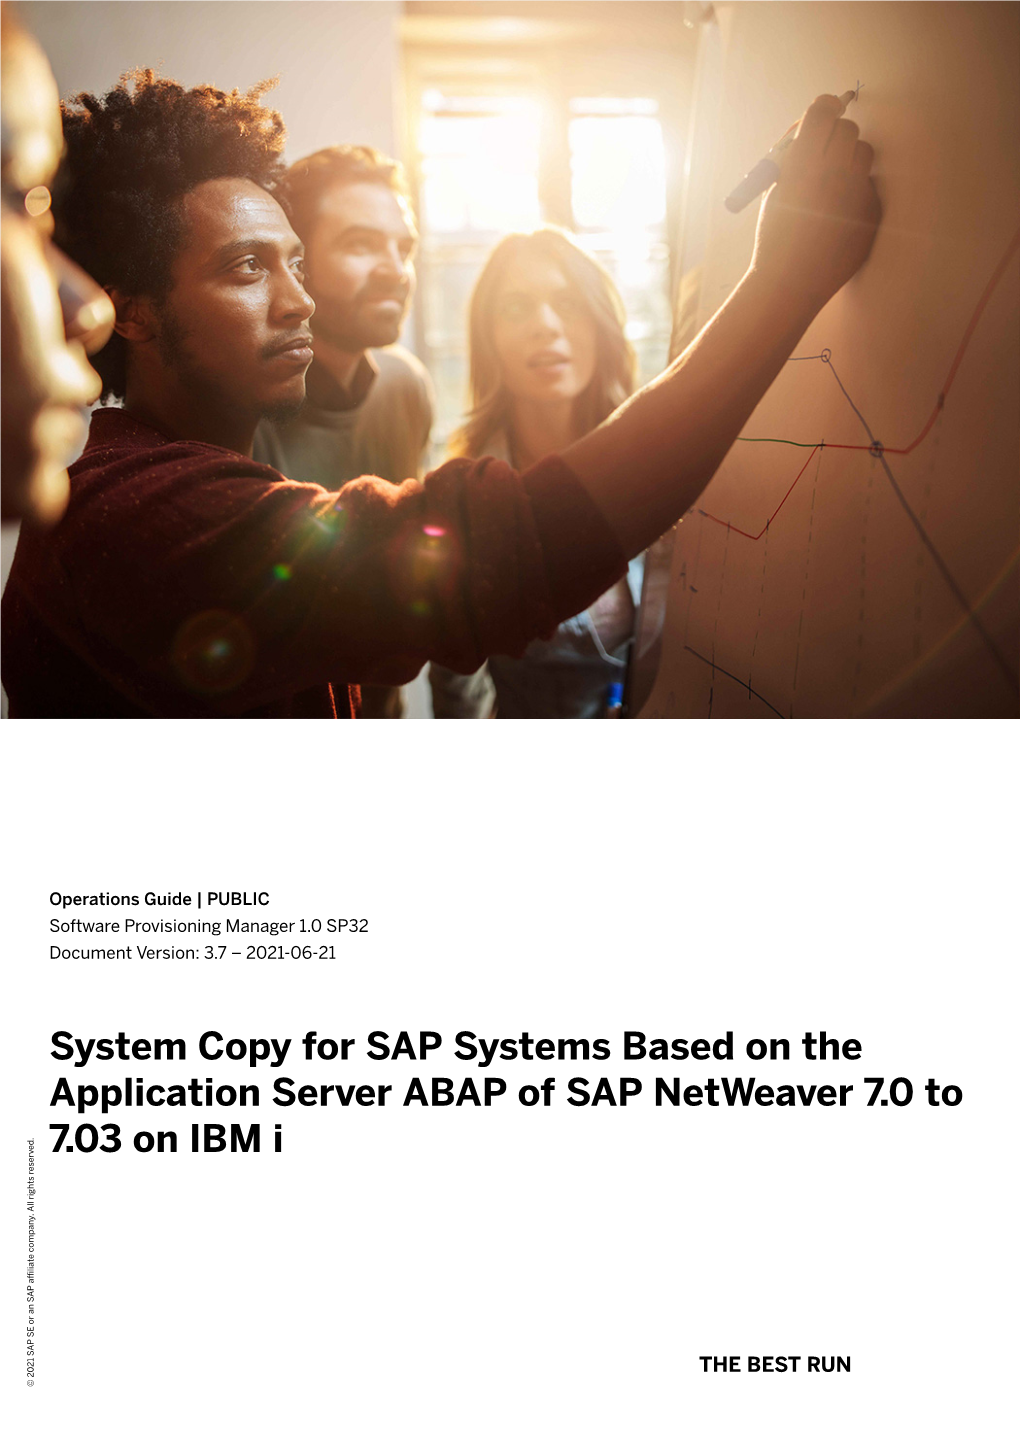 System Copy for SAP Systems Based on the Application Server ABAP of SAP Netweaver 7.0 to 7.03 on IBM I Company